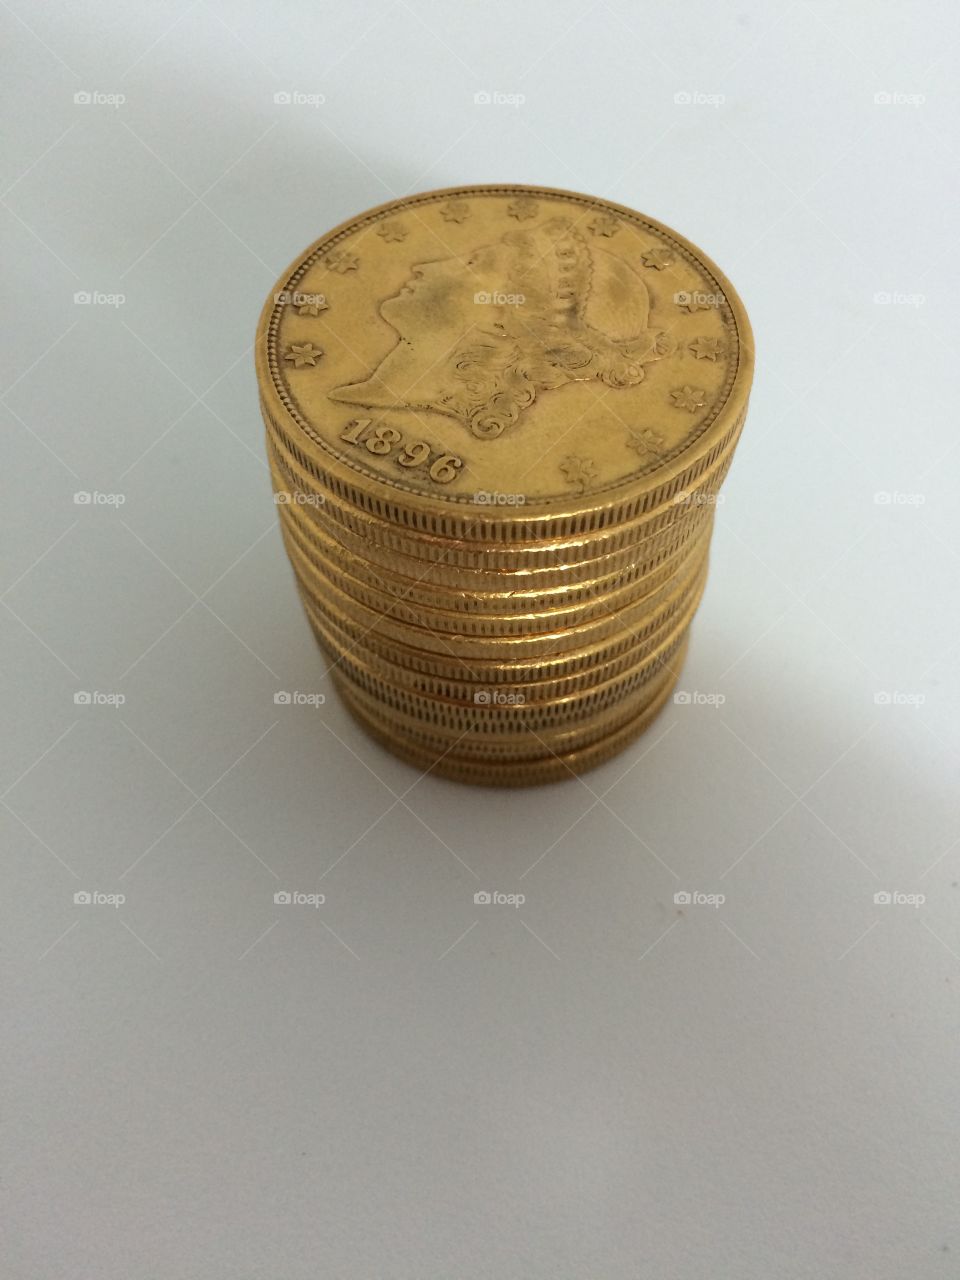 Gold coins. Stacking gold the old fashioned way. 